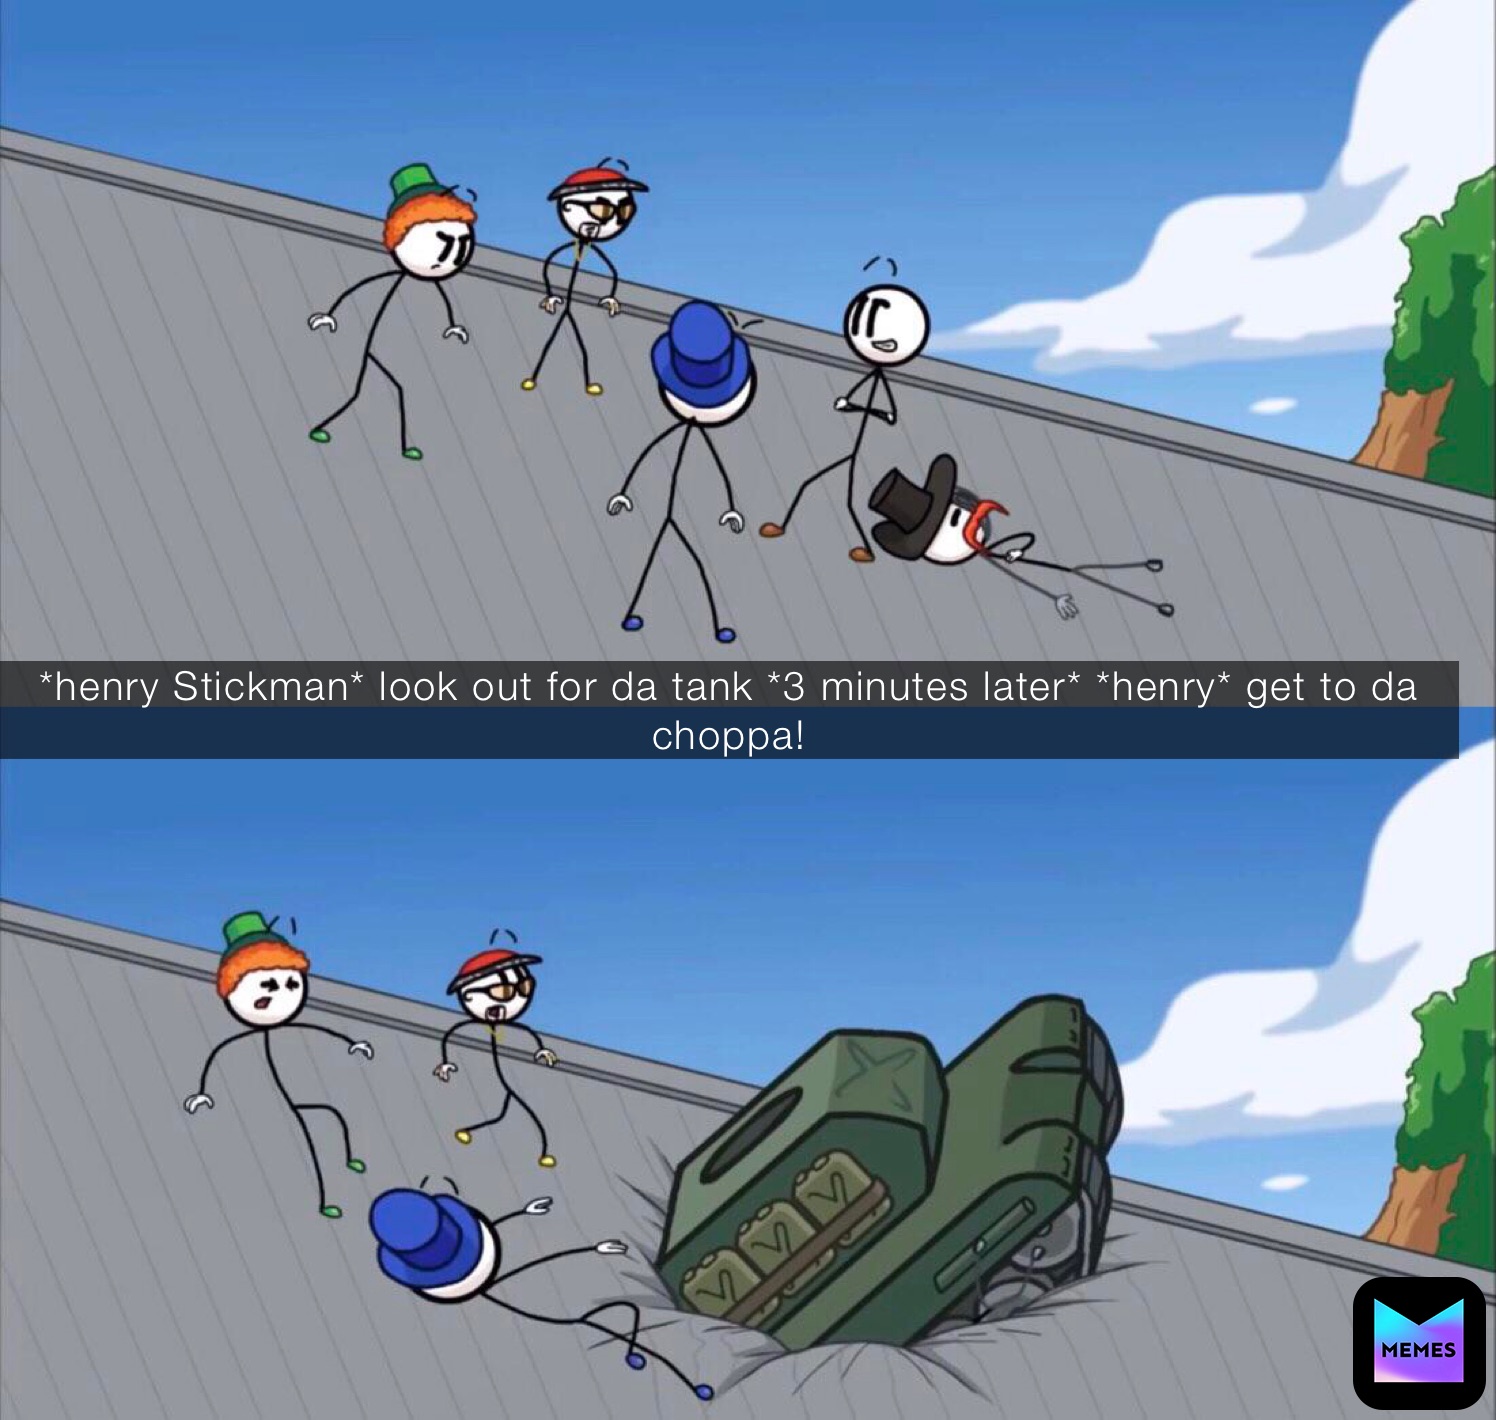 *henry Stickman* look out for da tank *3 minutes later* *henry* get to da choppa!